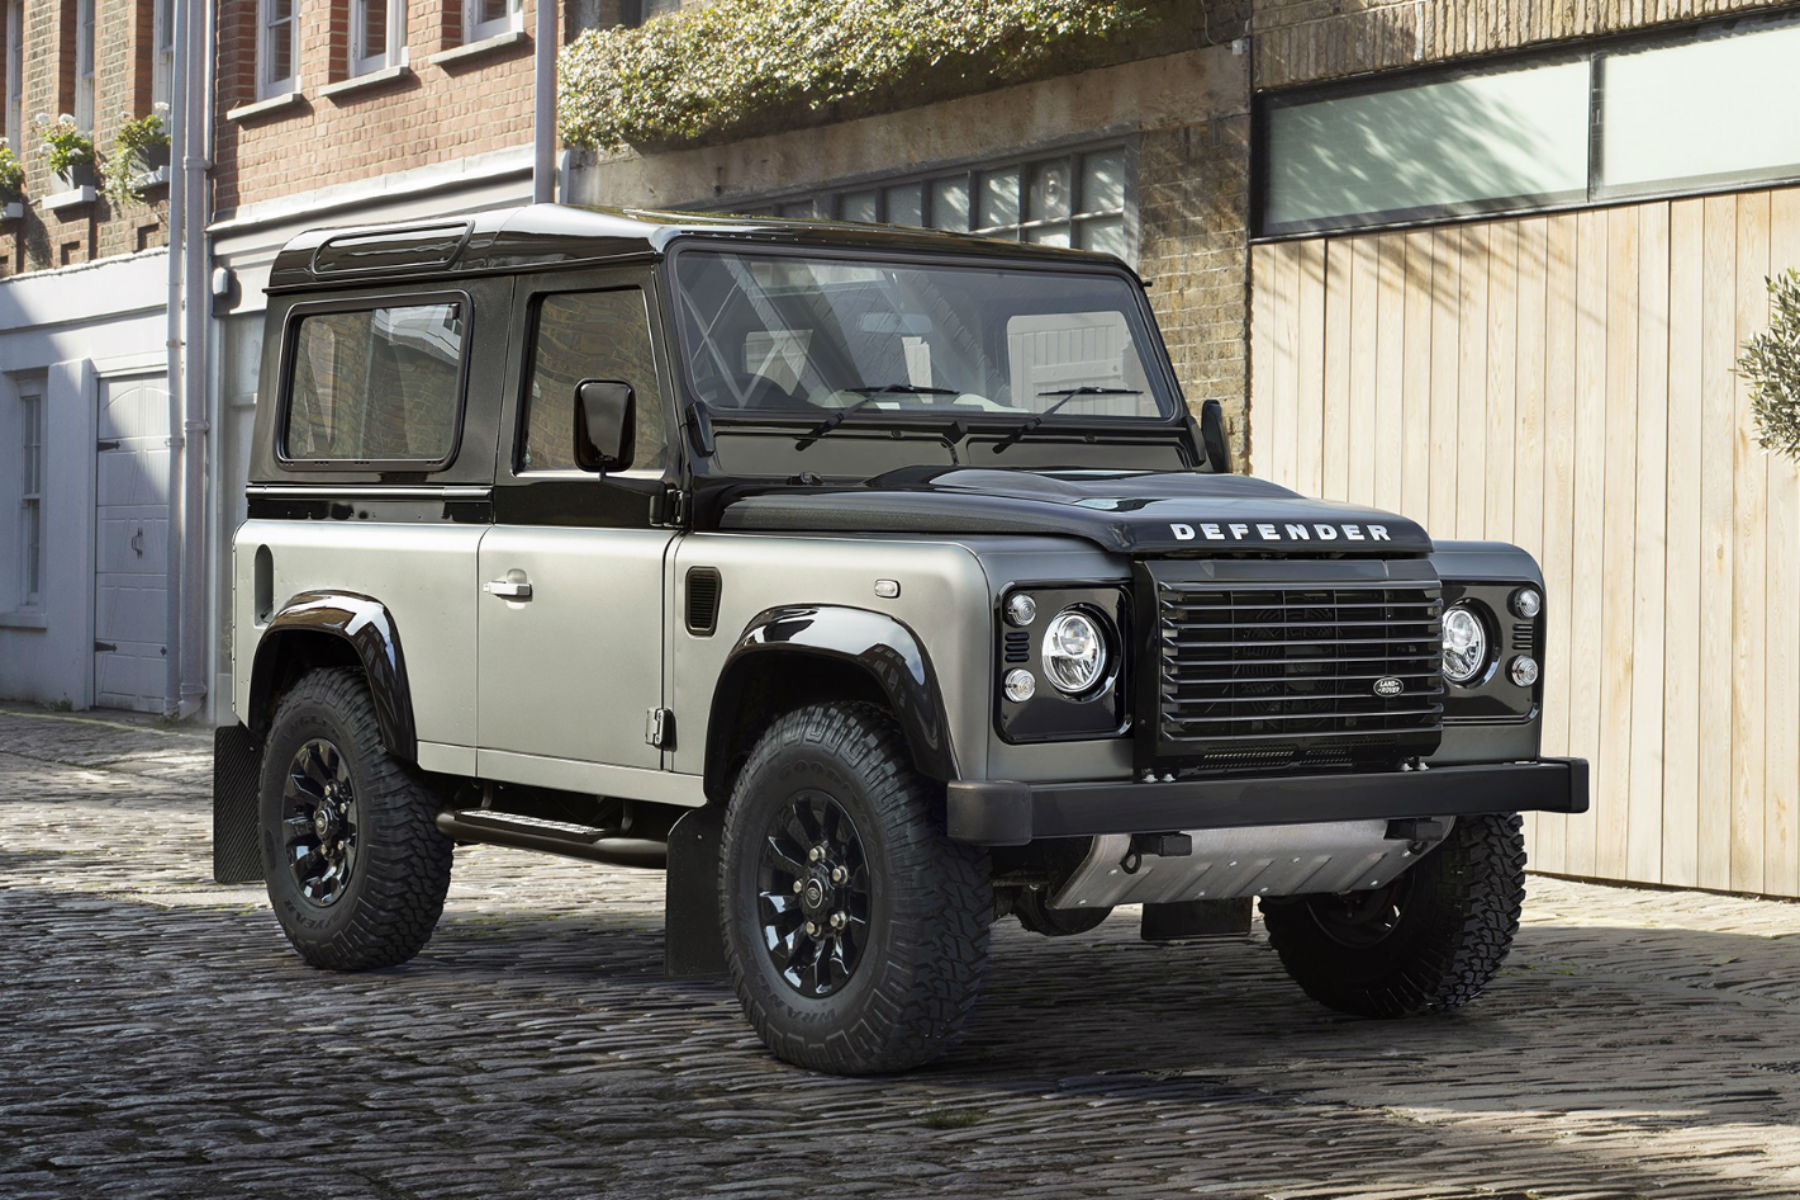 The Land Rover Defender V8 Works used to be a rare Autobiography